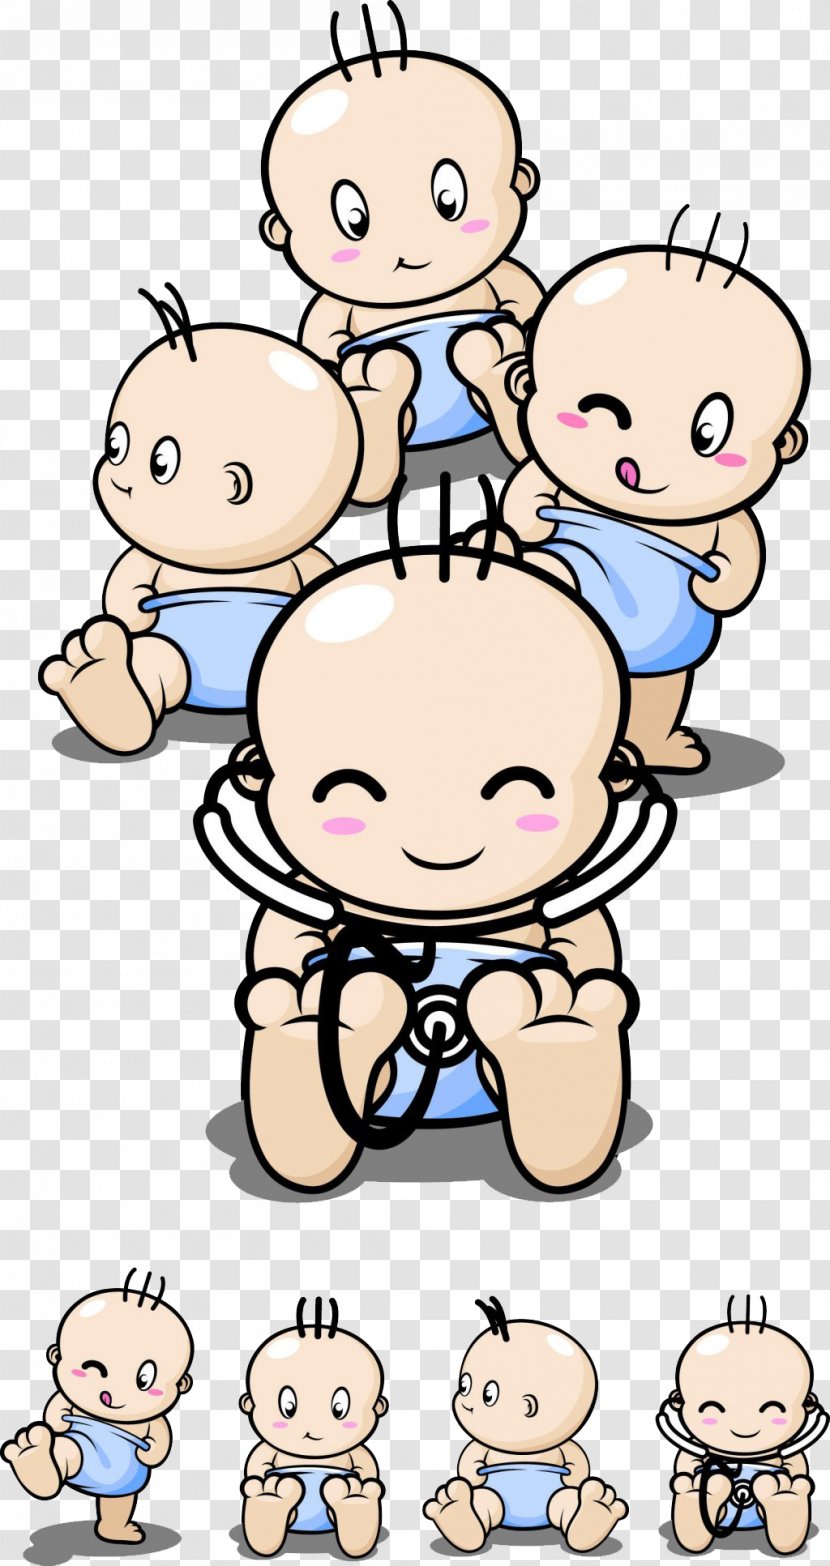 Infant Cartoon Drawing Clip Art - Silhouette - Cute Baby Transparent PNG